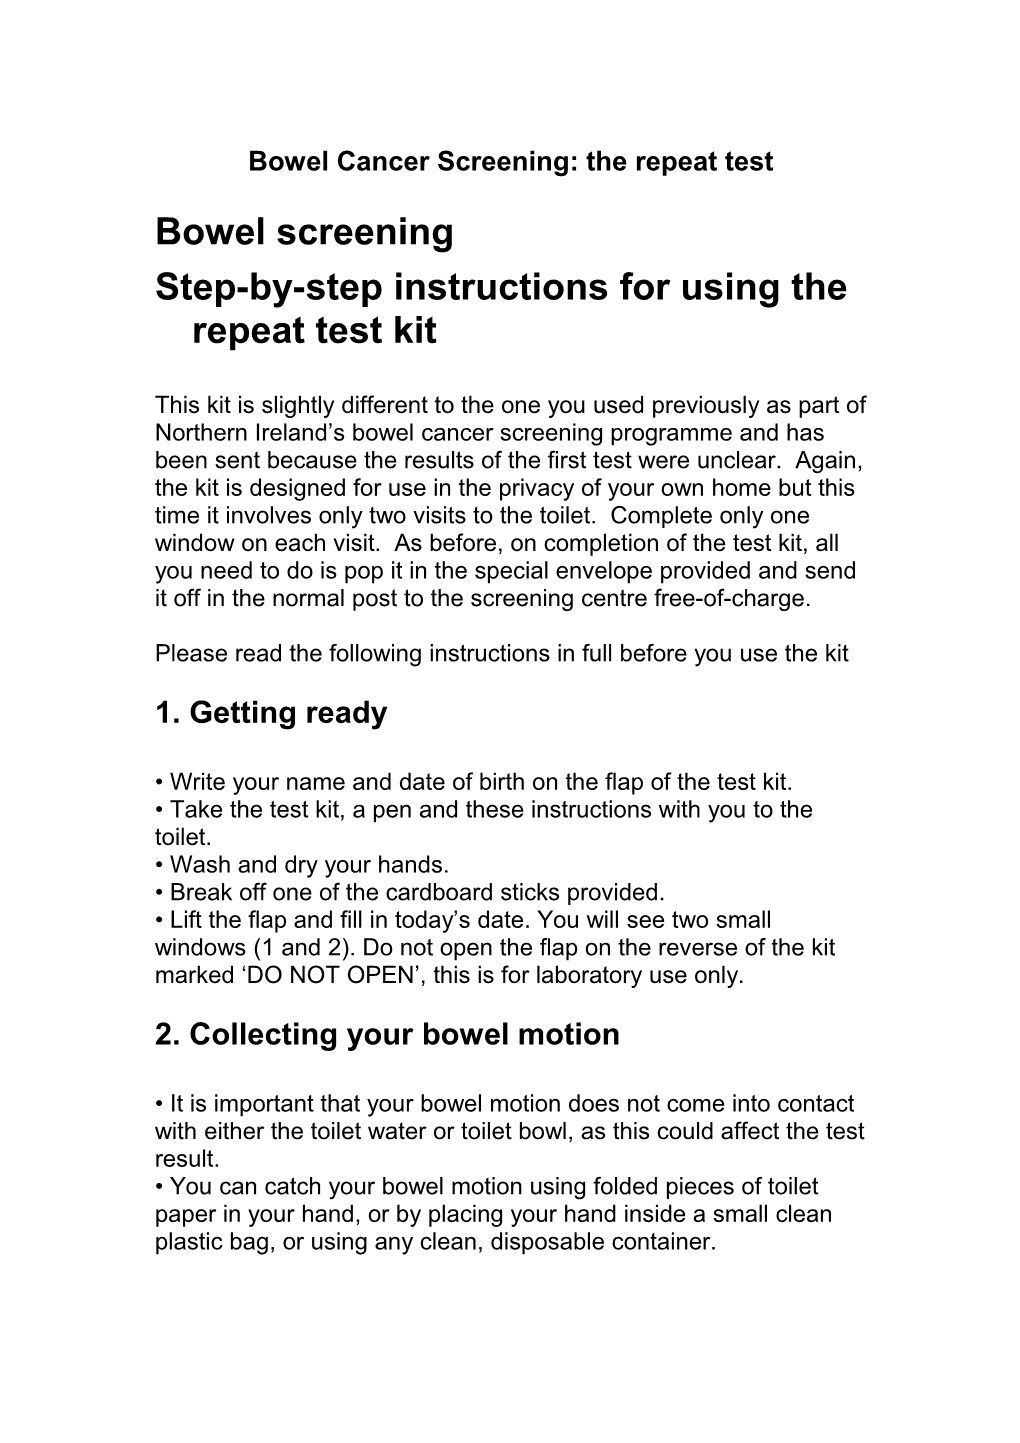 Bowel Cancer Screening: the Repeat Test